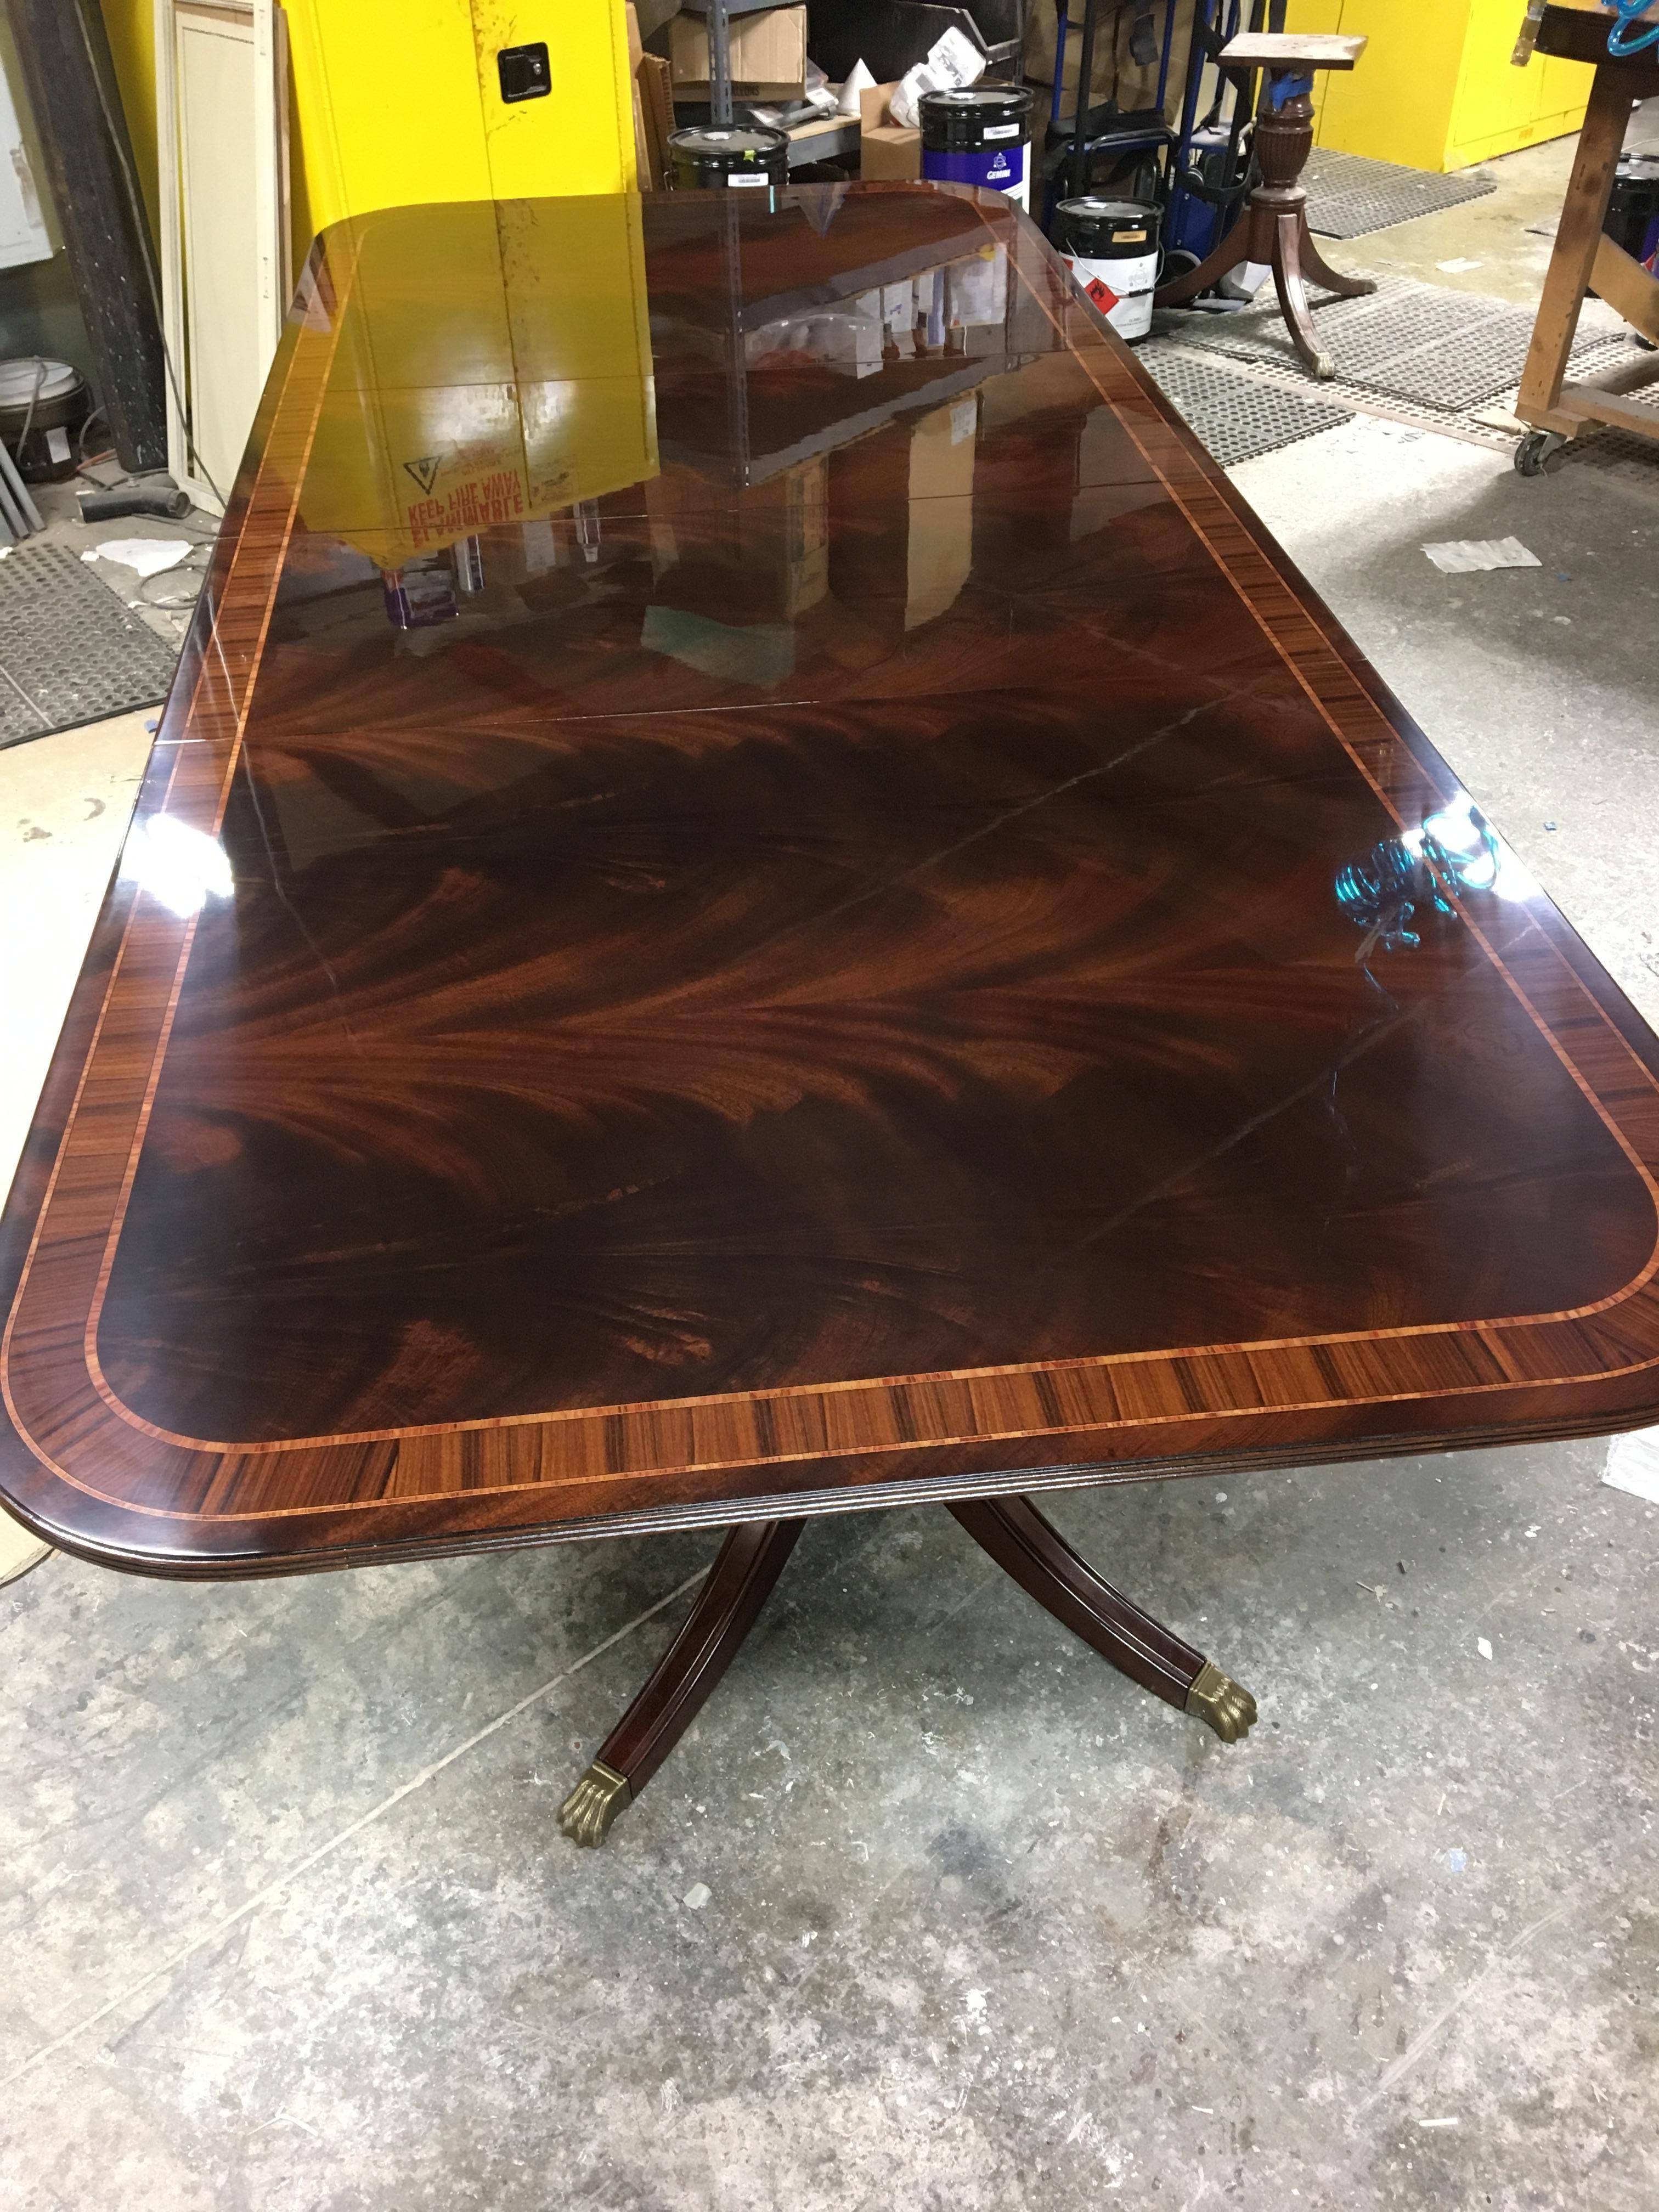 This is a made-to-order Large Traditional mahogany banquet/dining table made in the Leighton Hall shop. It features a field of slip-matched swirly crotch mahogany from west Africa and santos rosewood and crotch mahogany borders. It has a hand rubbed